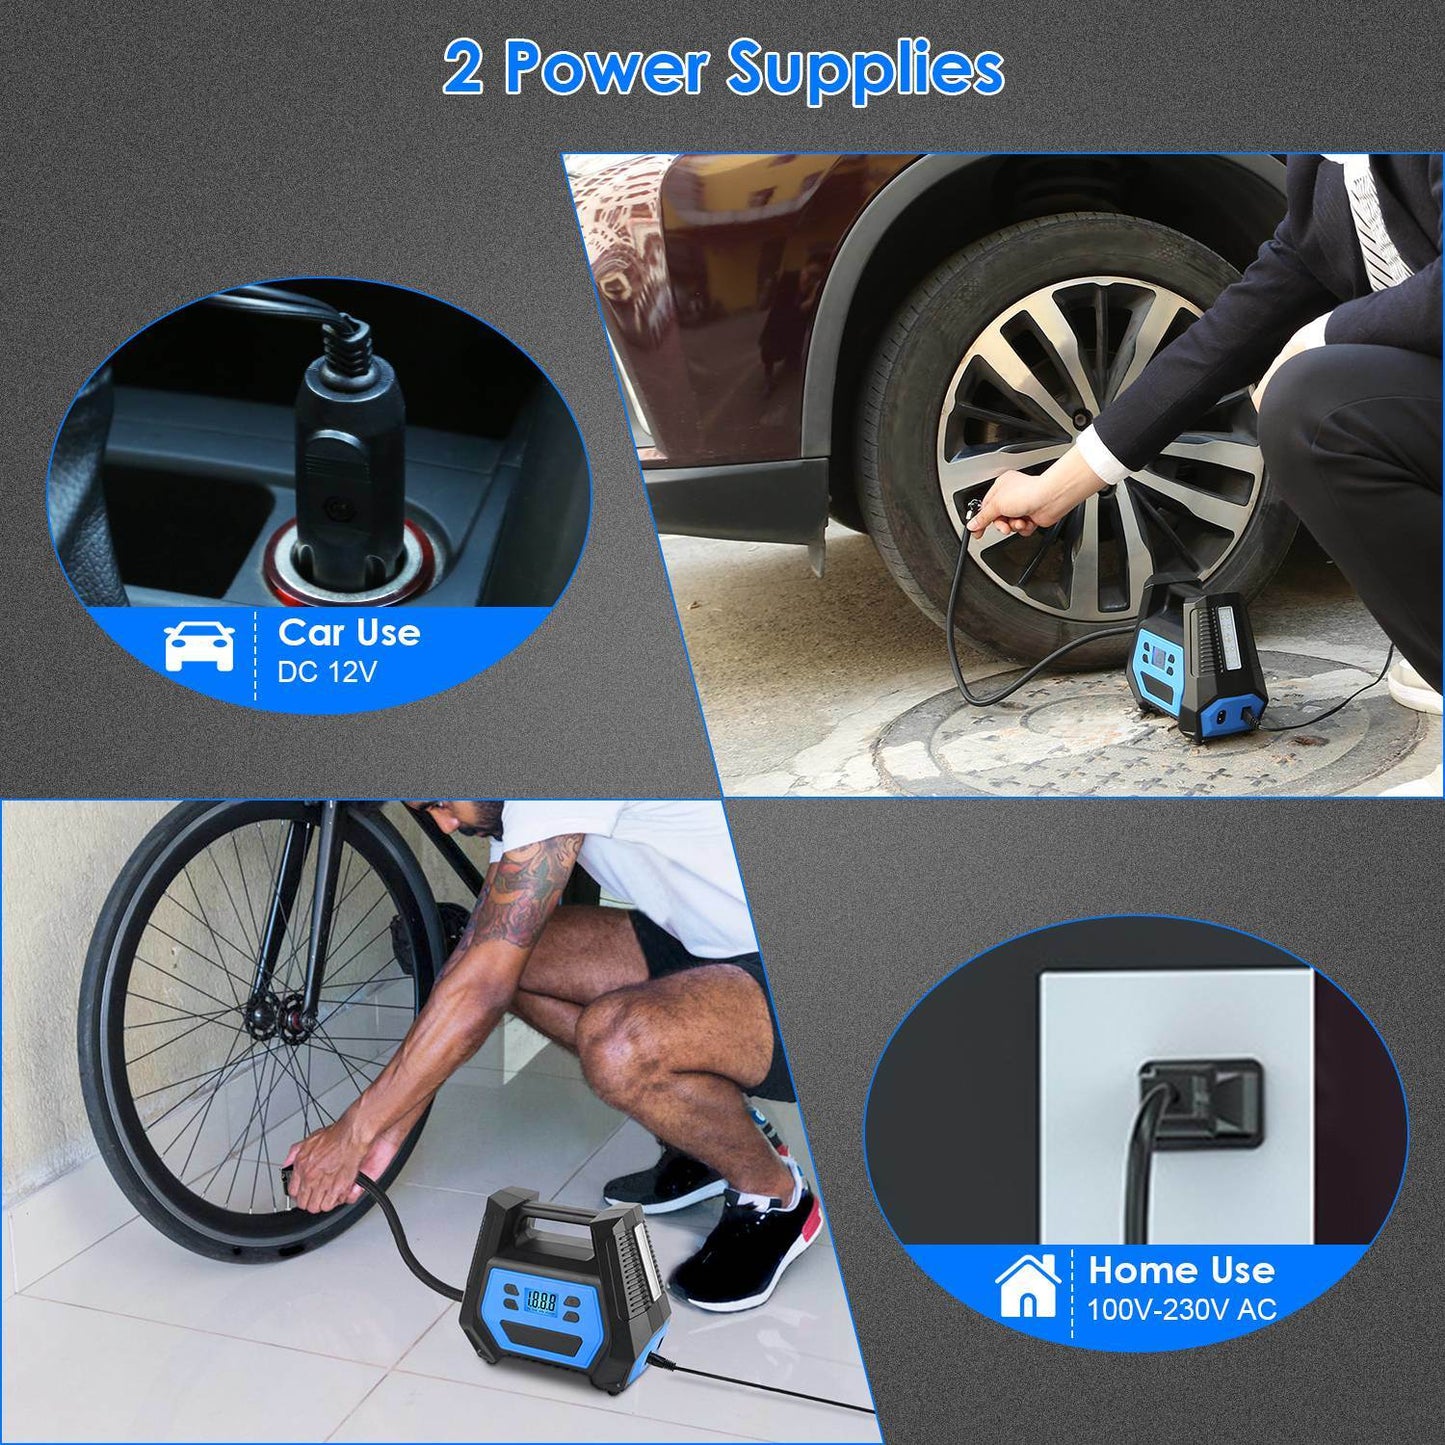 Portable Tire Inflator 150 PSI 120W Max Power Tire Pump with Digital Display LED Light Inflatable Nozzle Needle Fuse Air Compressor for Bikes Motorbikes Cars Balls